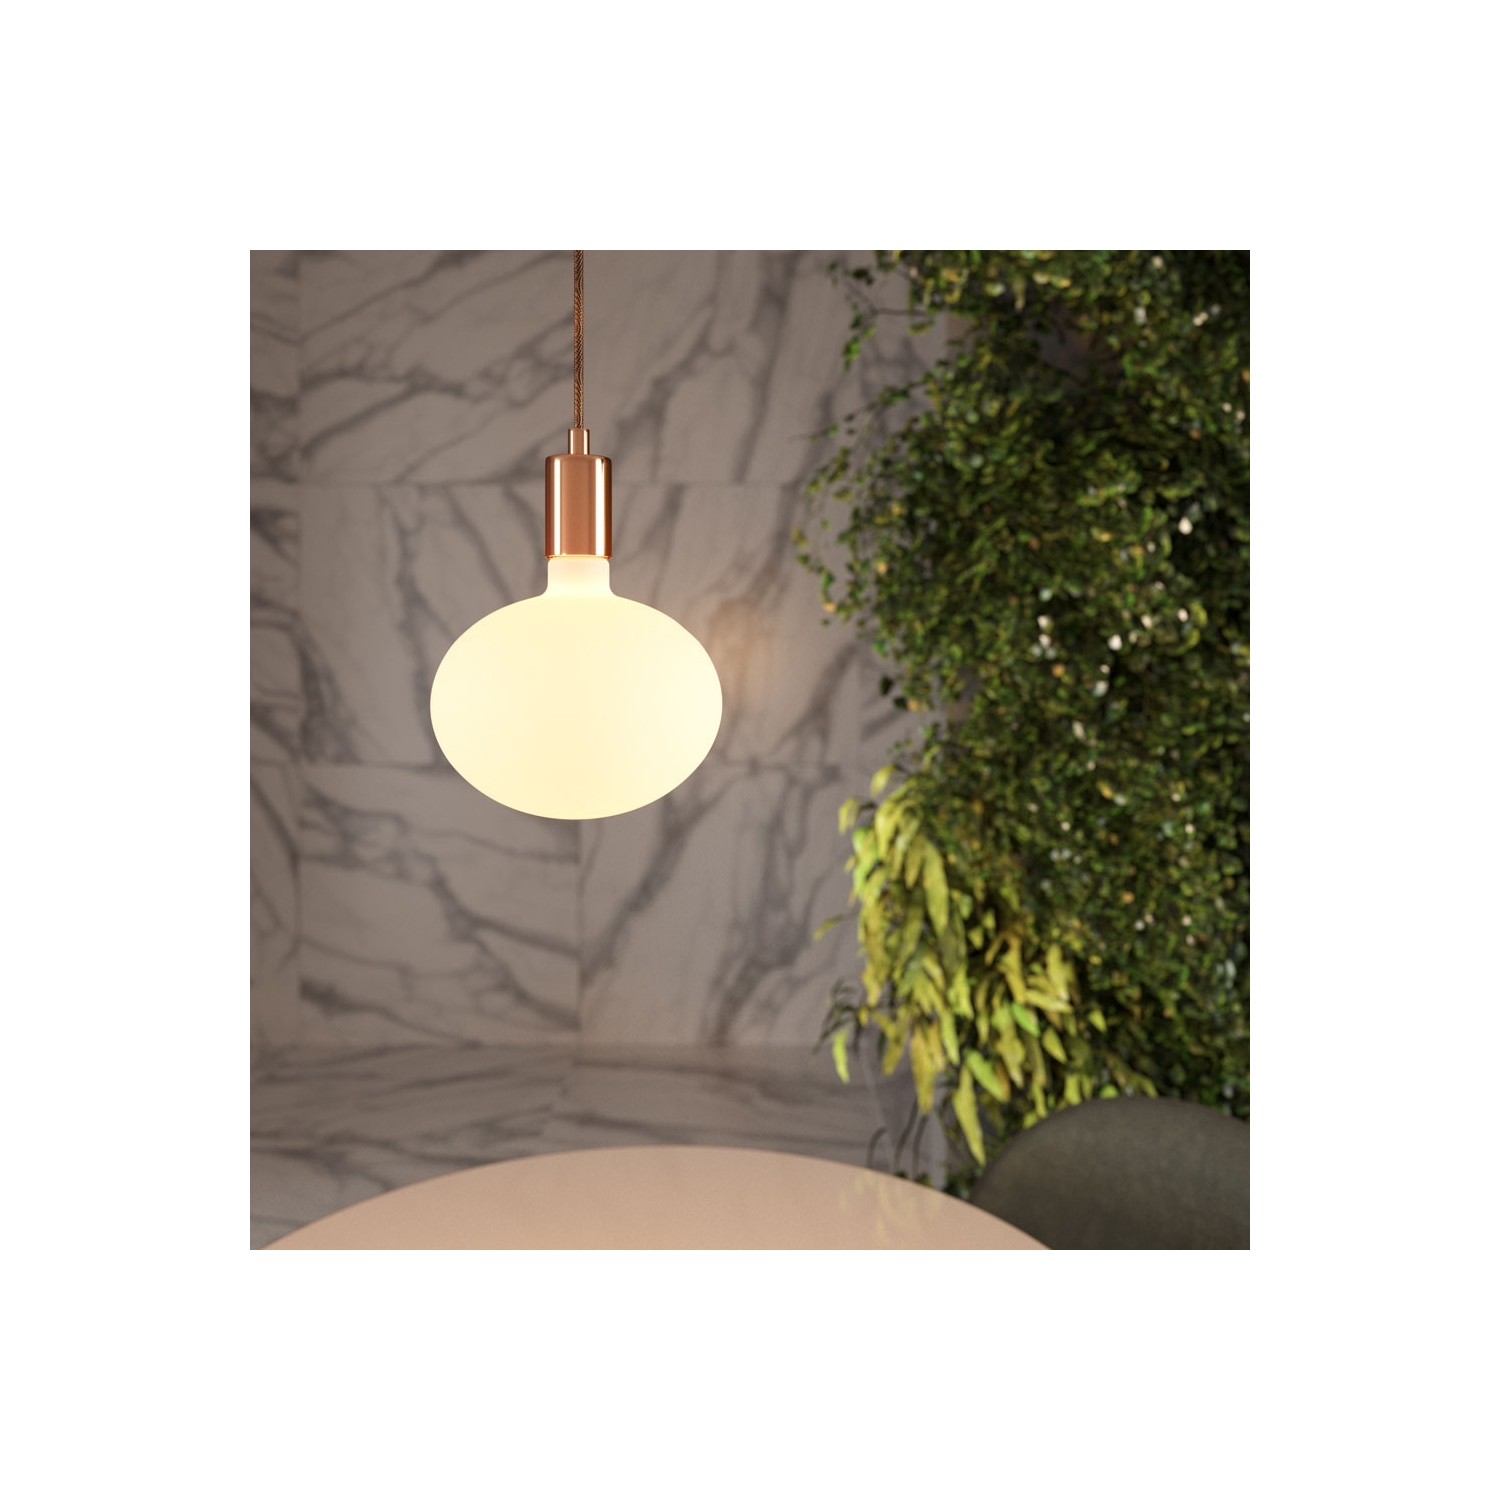 Ceiling Pendant Light with cloth covered wire Black & Copper or White & Brass